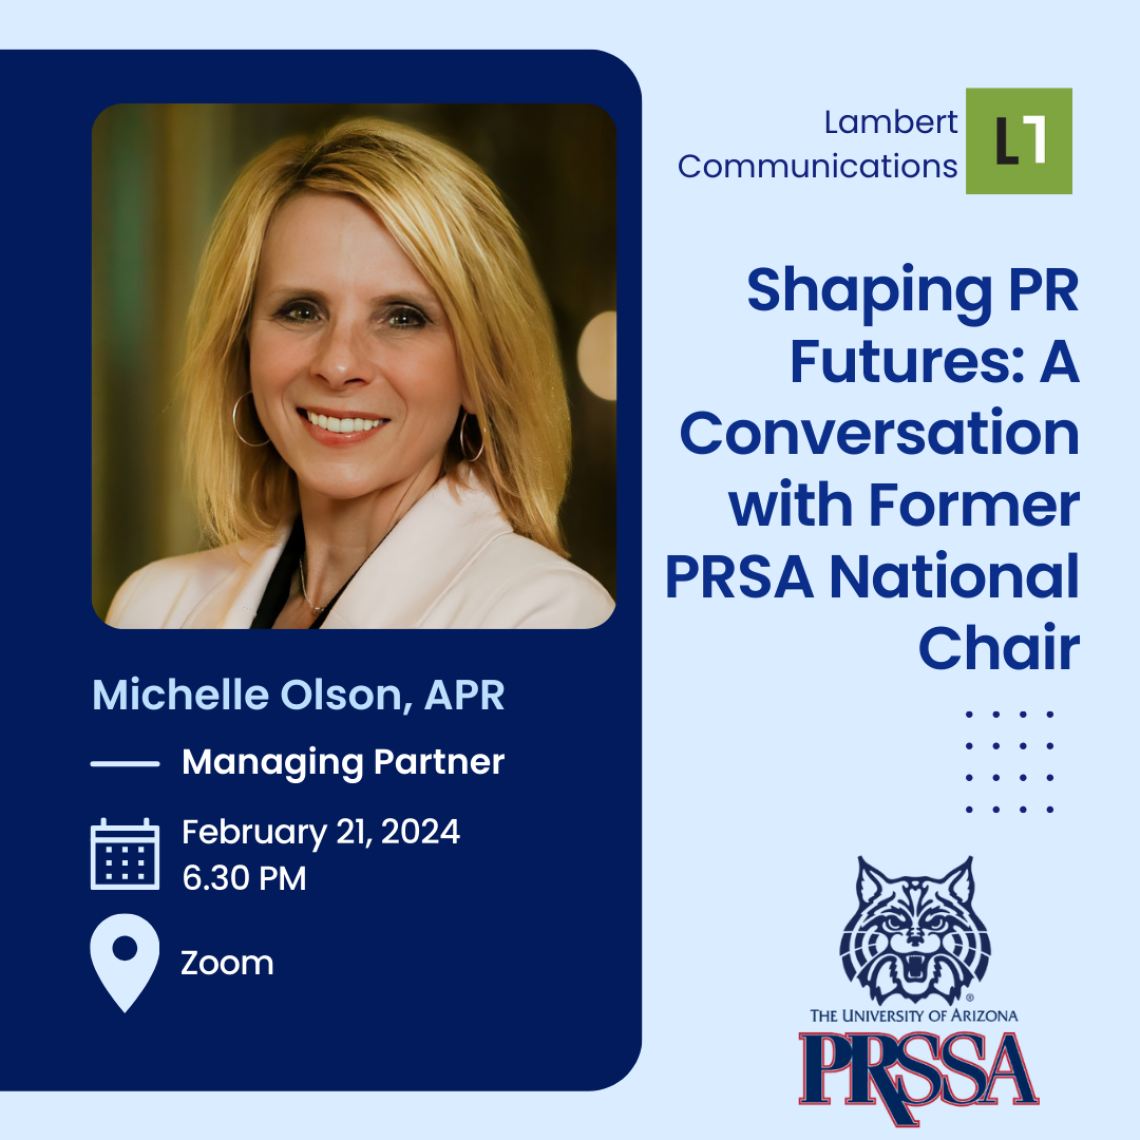 PRSSA Spring 2024 Meeting: Shaping PR Futures: A Conversation with Former PRSA National Chair